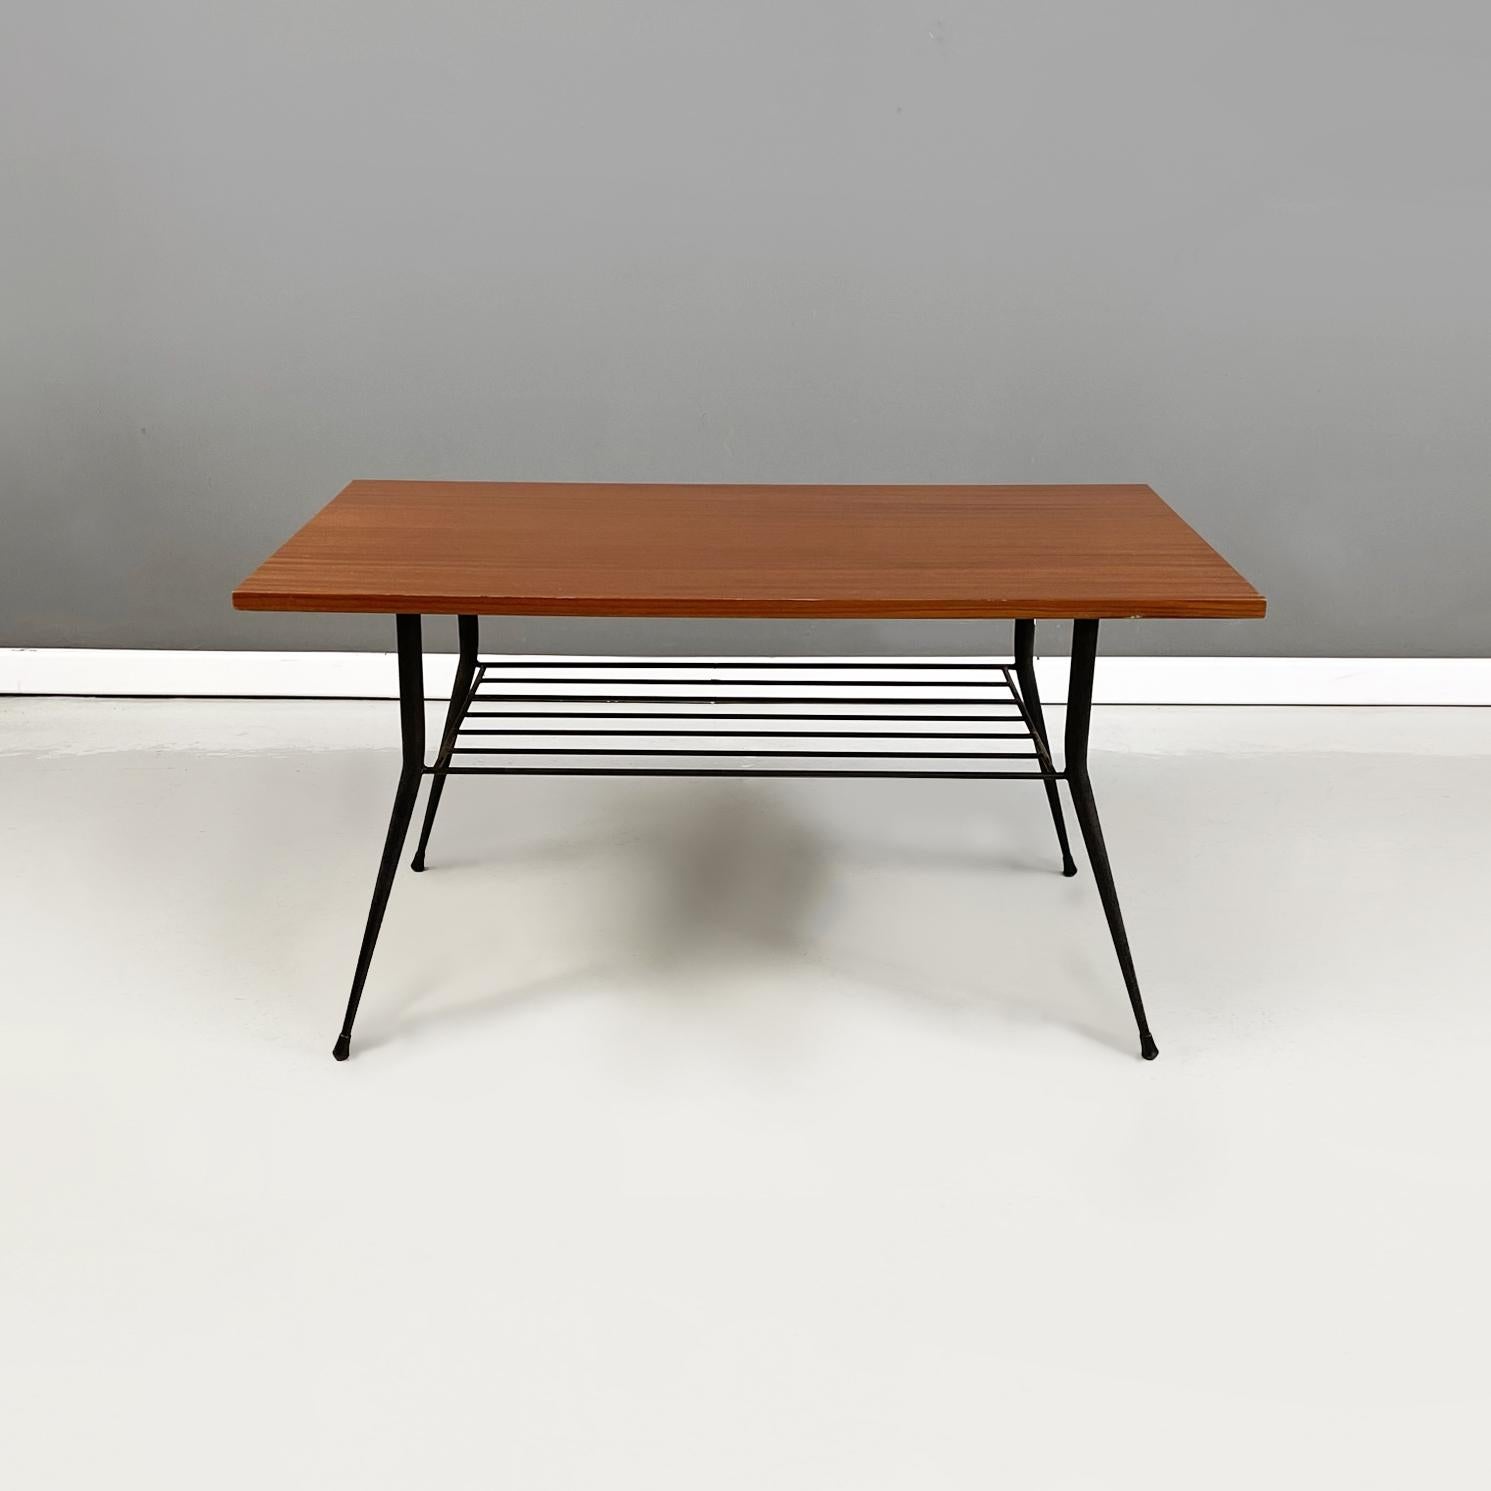 Italian mid-century Coffee table with magazine rack in wood and metal, 1960s
Coffee table with rectangular wooden top. Under the top there is a magazine rack in black metal rod. Legs in black metal rod with round feet.
1960s.
Good condition, the